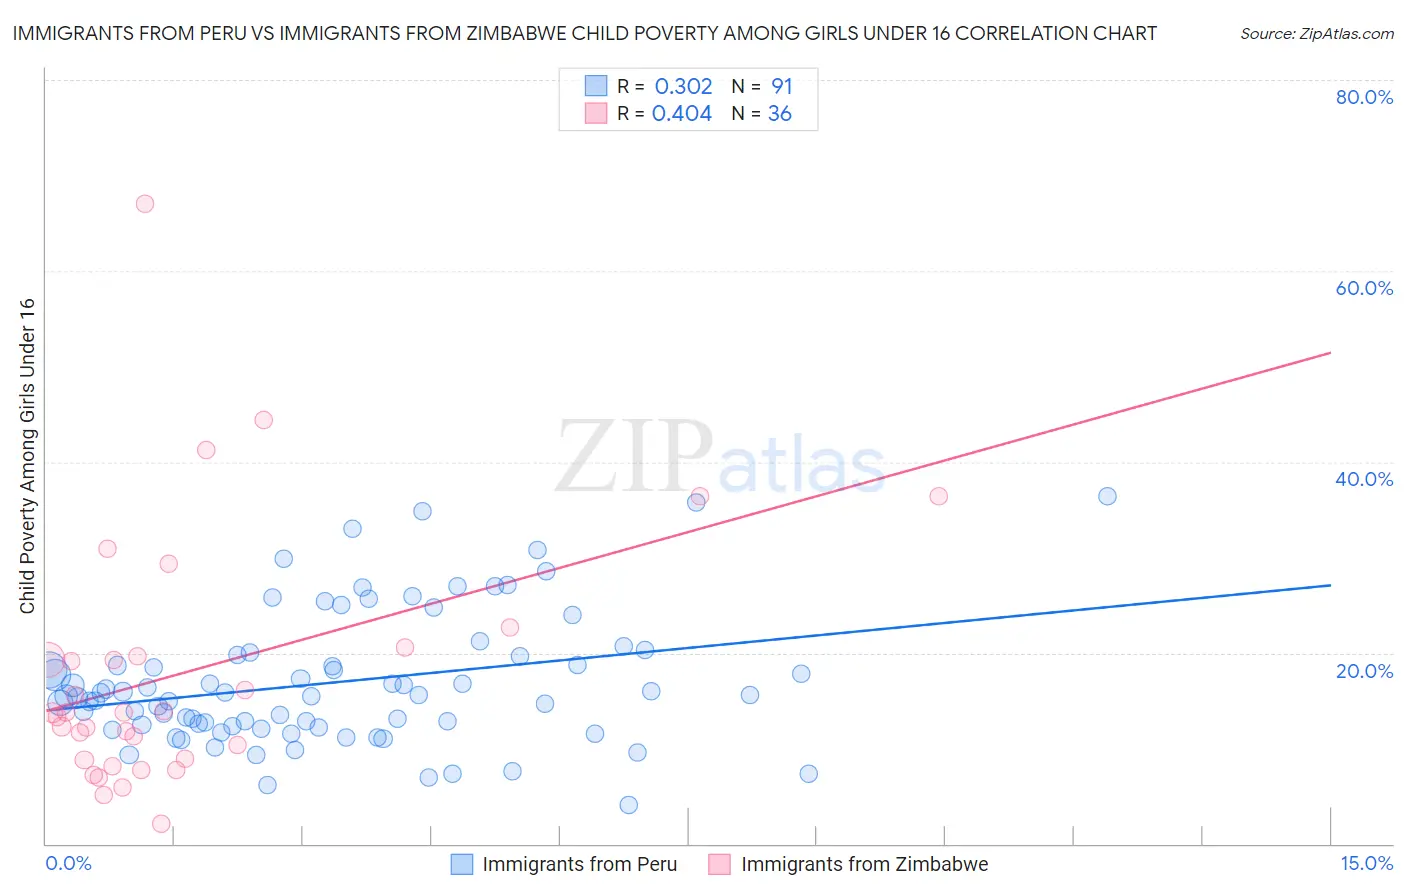 Immigrants from Peru vs Immigrants from Zimbabwe Child Poverty Among Girls Under 16